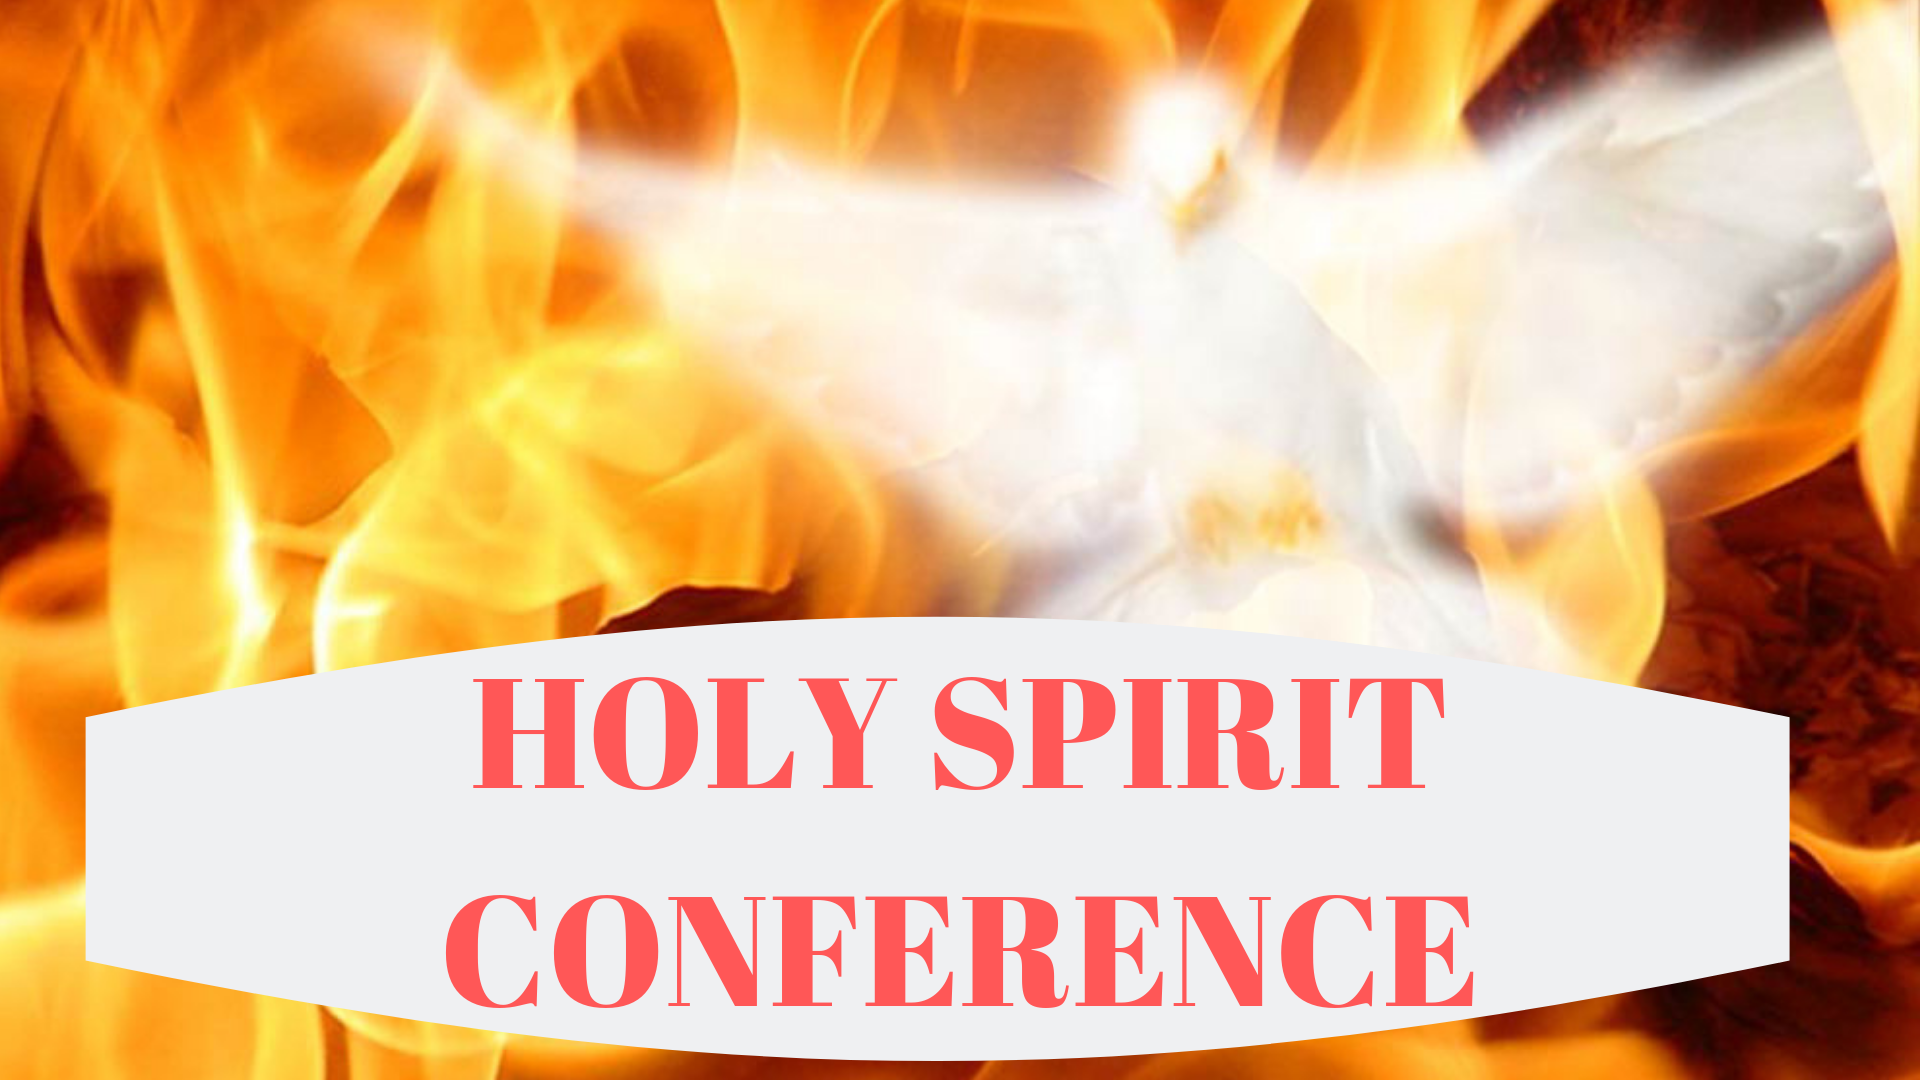 HOLY SPIRIT CONFERENCEb Fountain of Life Christian Center